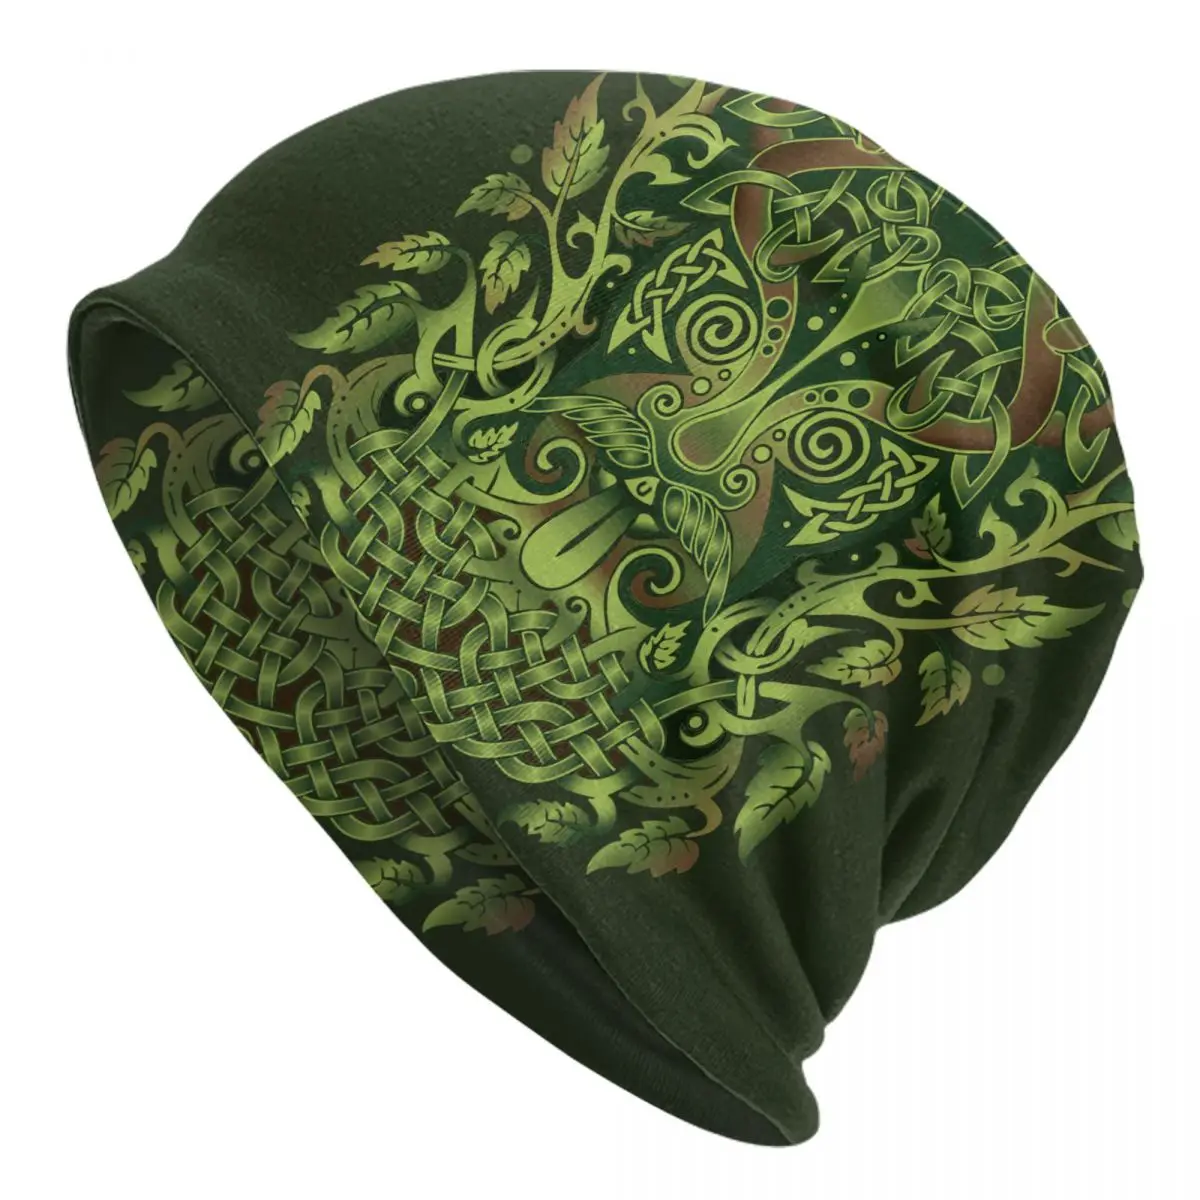 The Green Man Adult Knit Hat Men's Women's Keep warm winter knitted hat